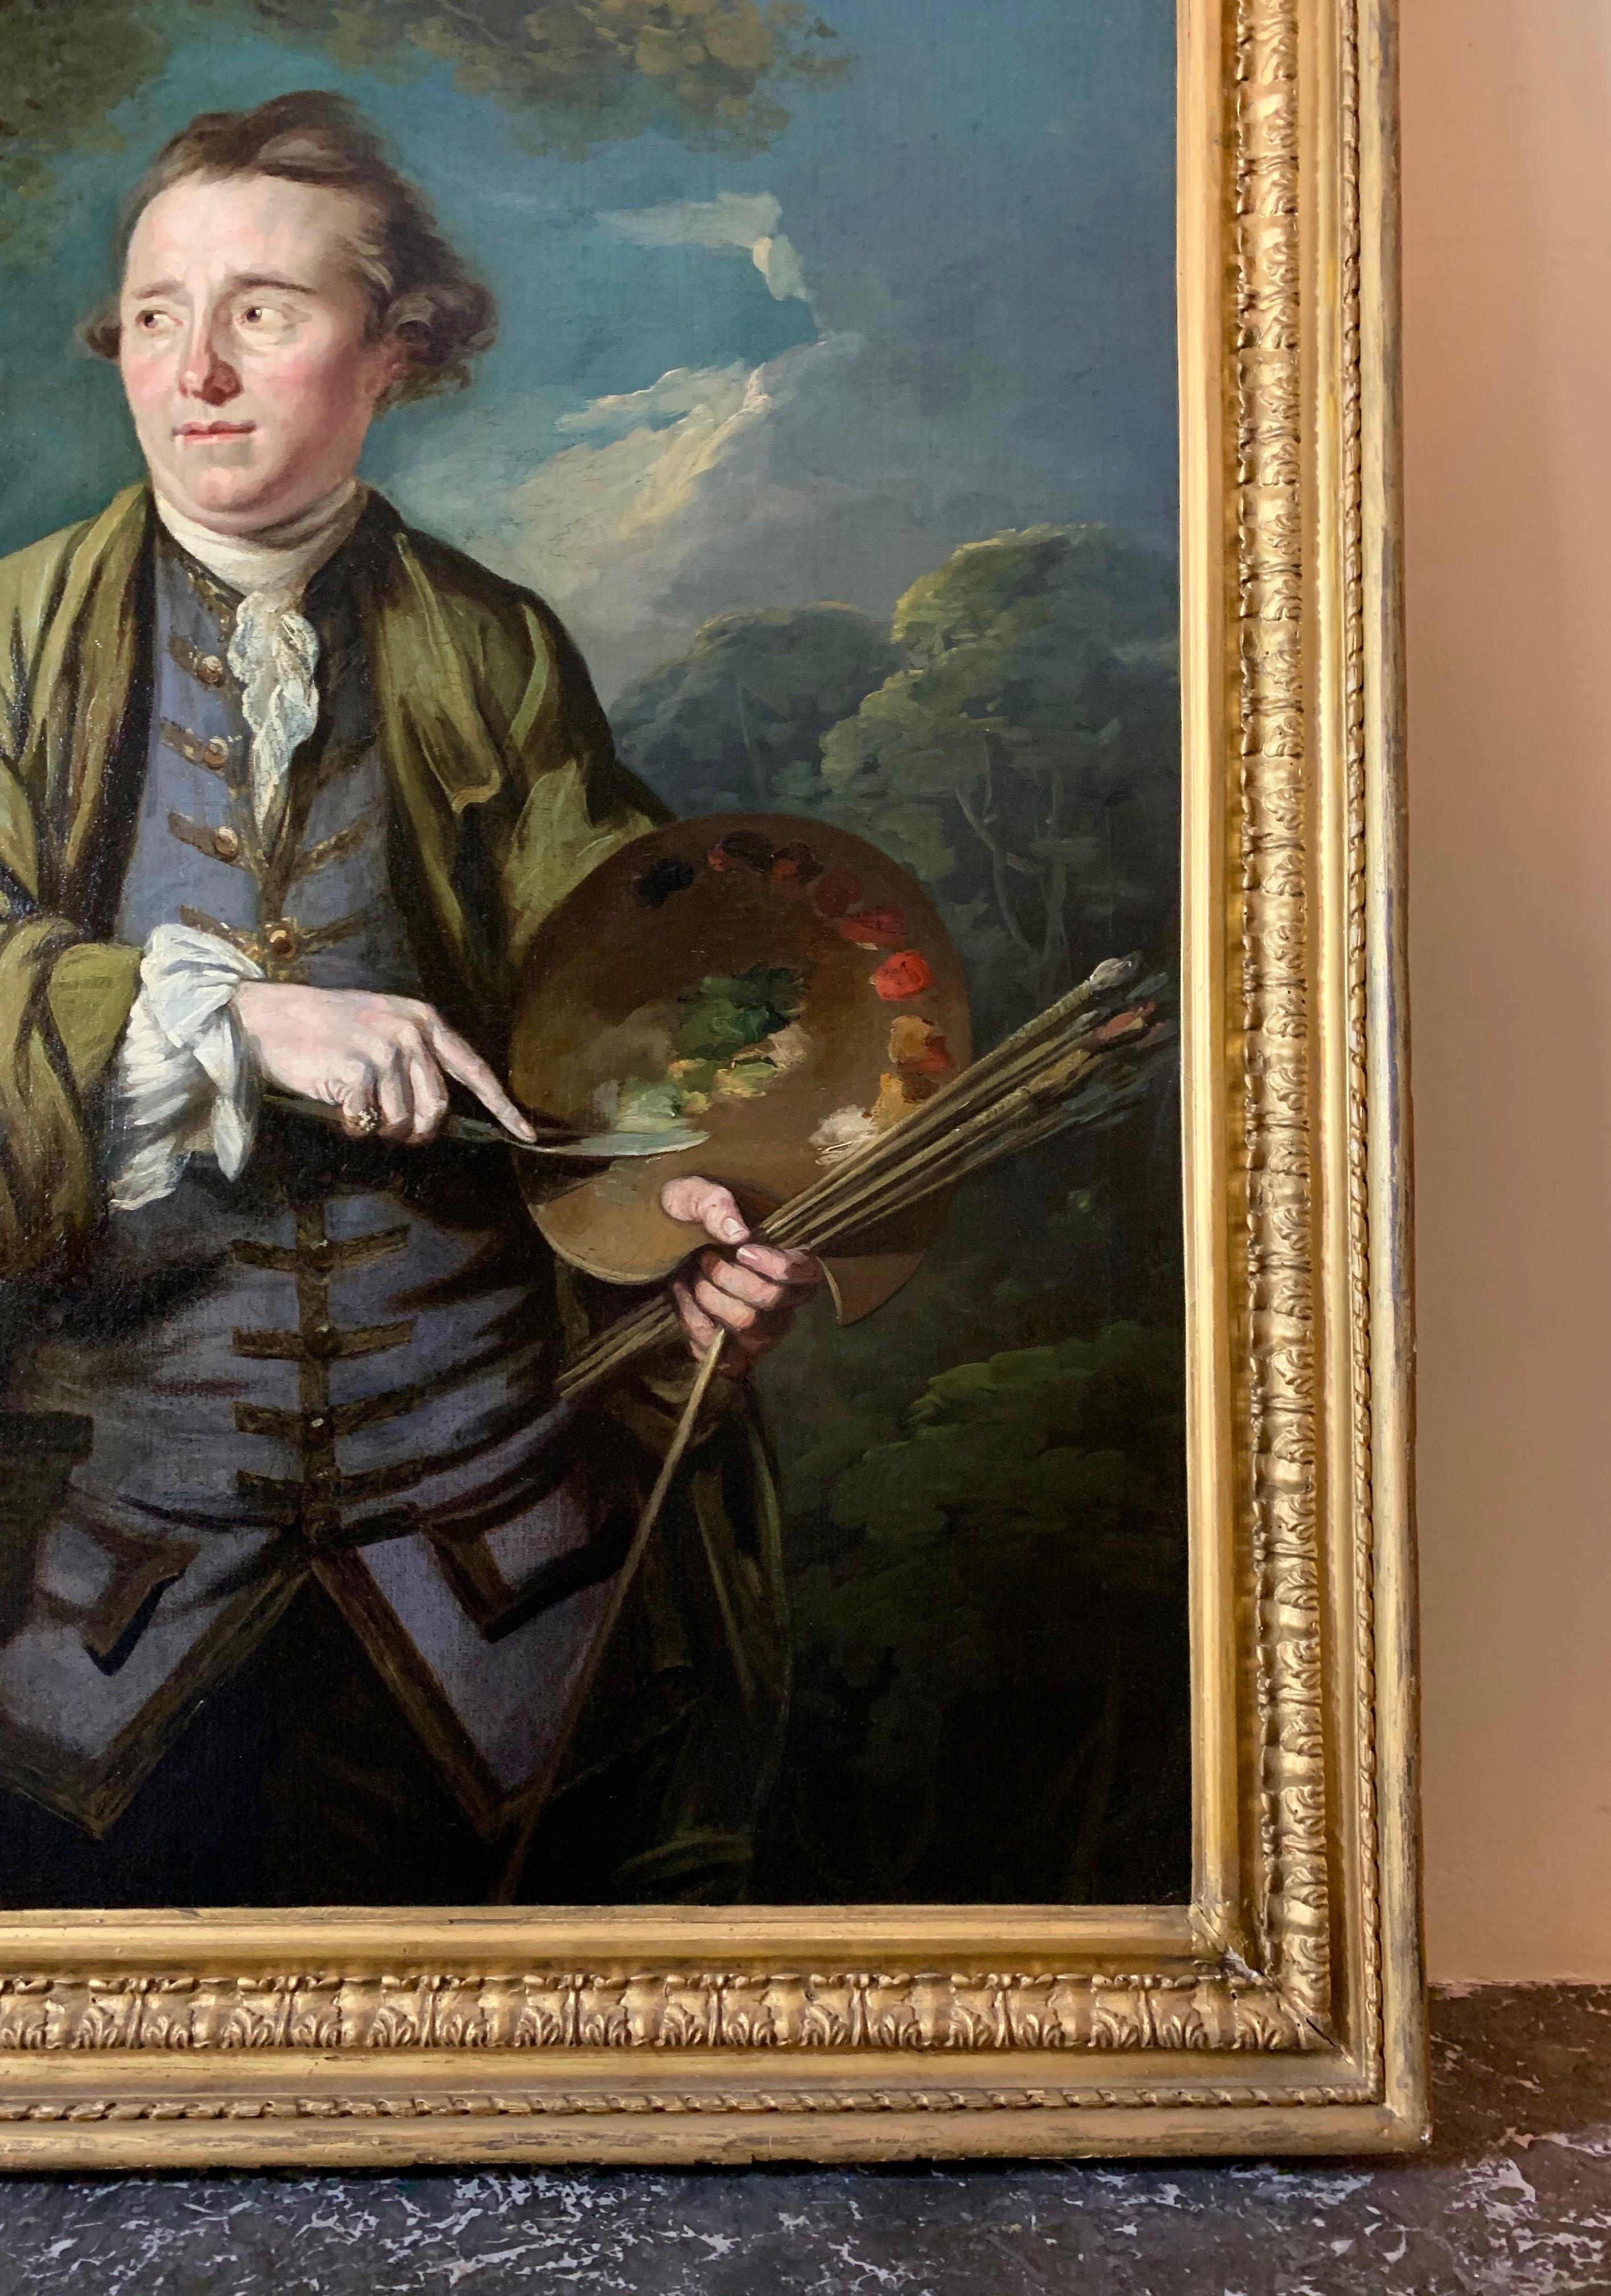 18TH CENTURY PORTRAIT OF AN ARTIST - ATTRIBUTED TO  JAMES NORTHCOTE (1756-1831)

A fine, vibrant and  highly decorative 18th century oil on canvas ‘Portrait of an Artist’ originally thought to be the by the hand of Joseph Wright of Derby